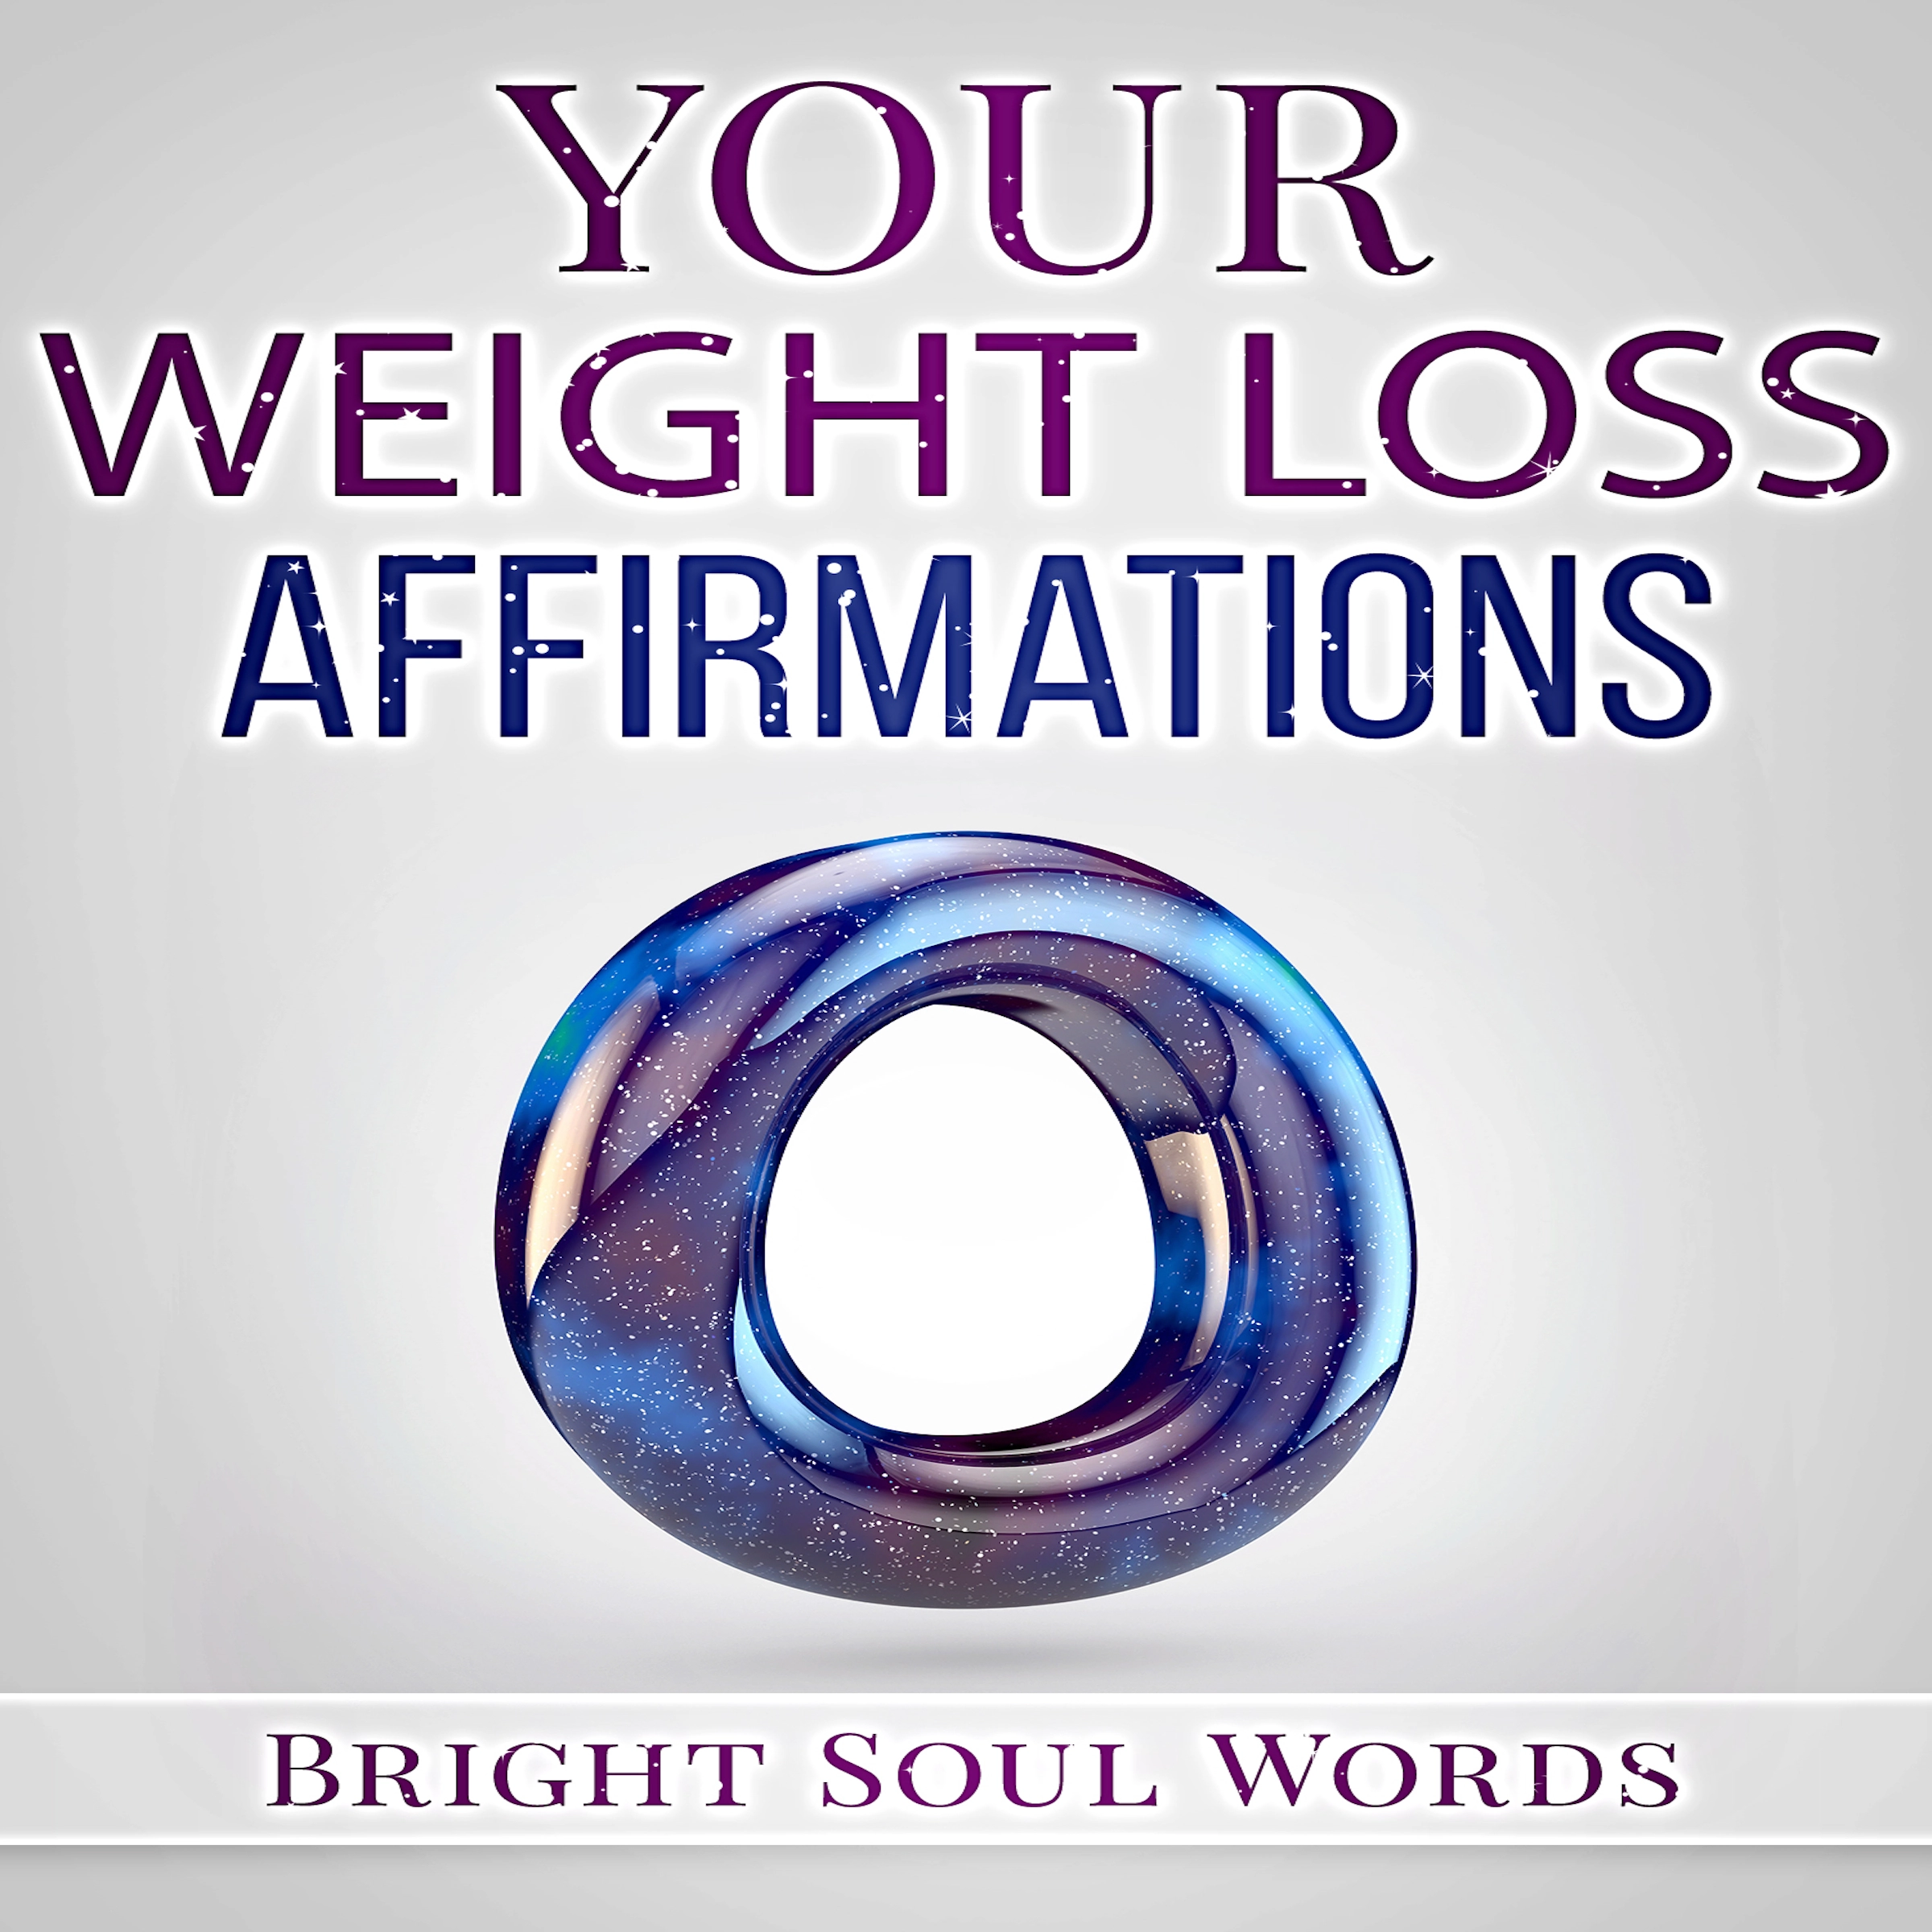 Your Weight Loss Affirmations Audiobook by Bright Soul Words